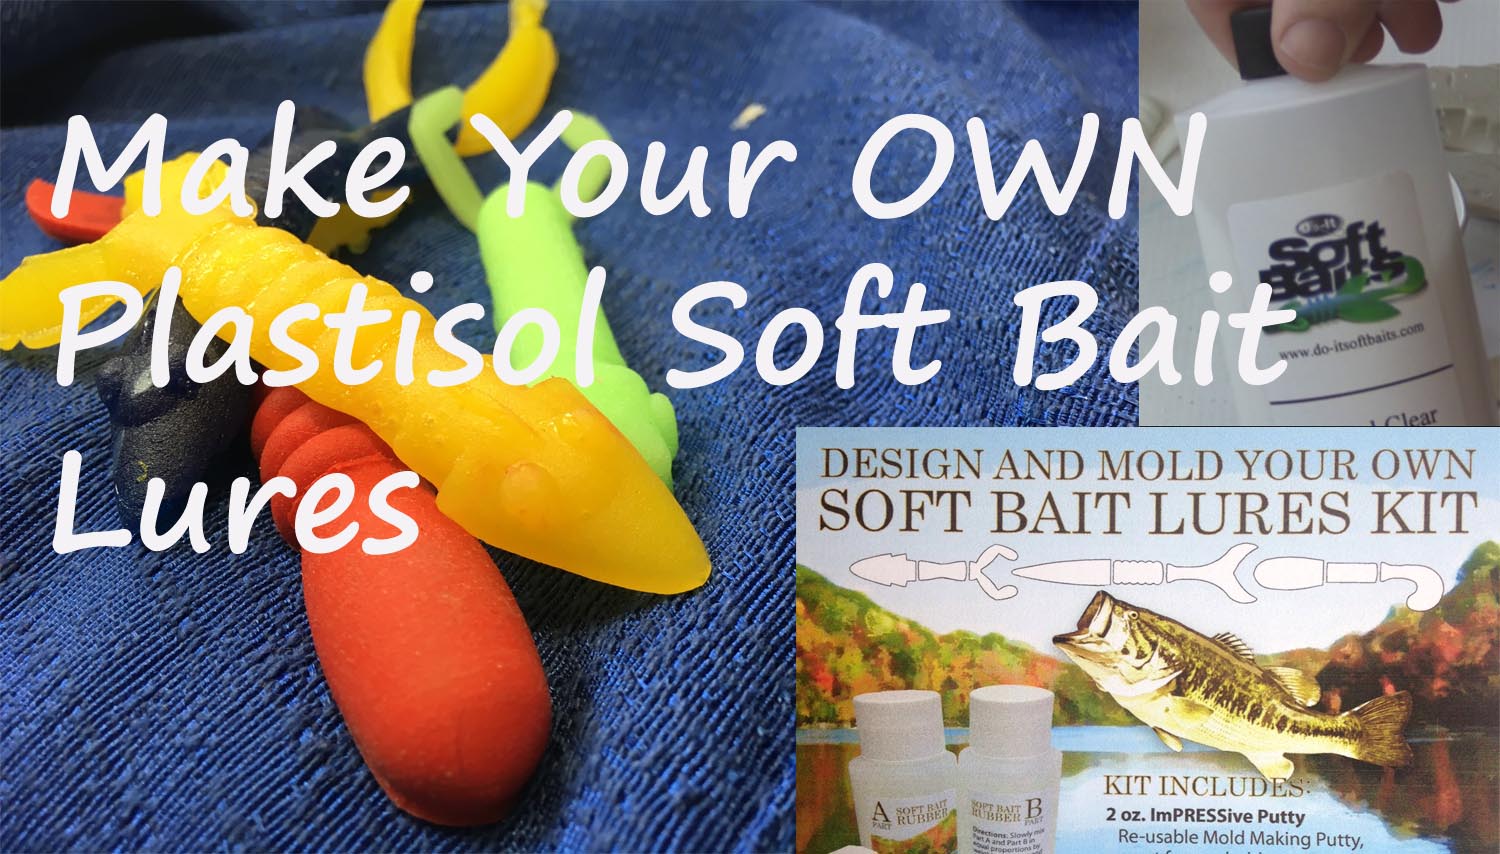 Make Your Own Soft Bait Fishing Lures with Plastisol PVC Based Do